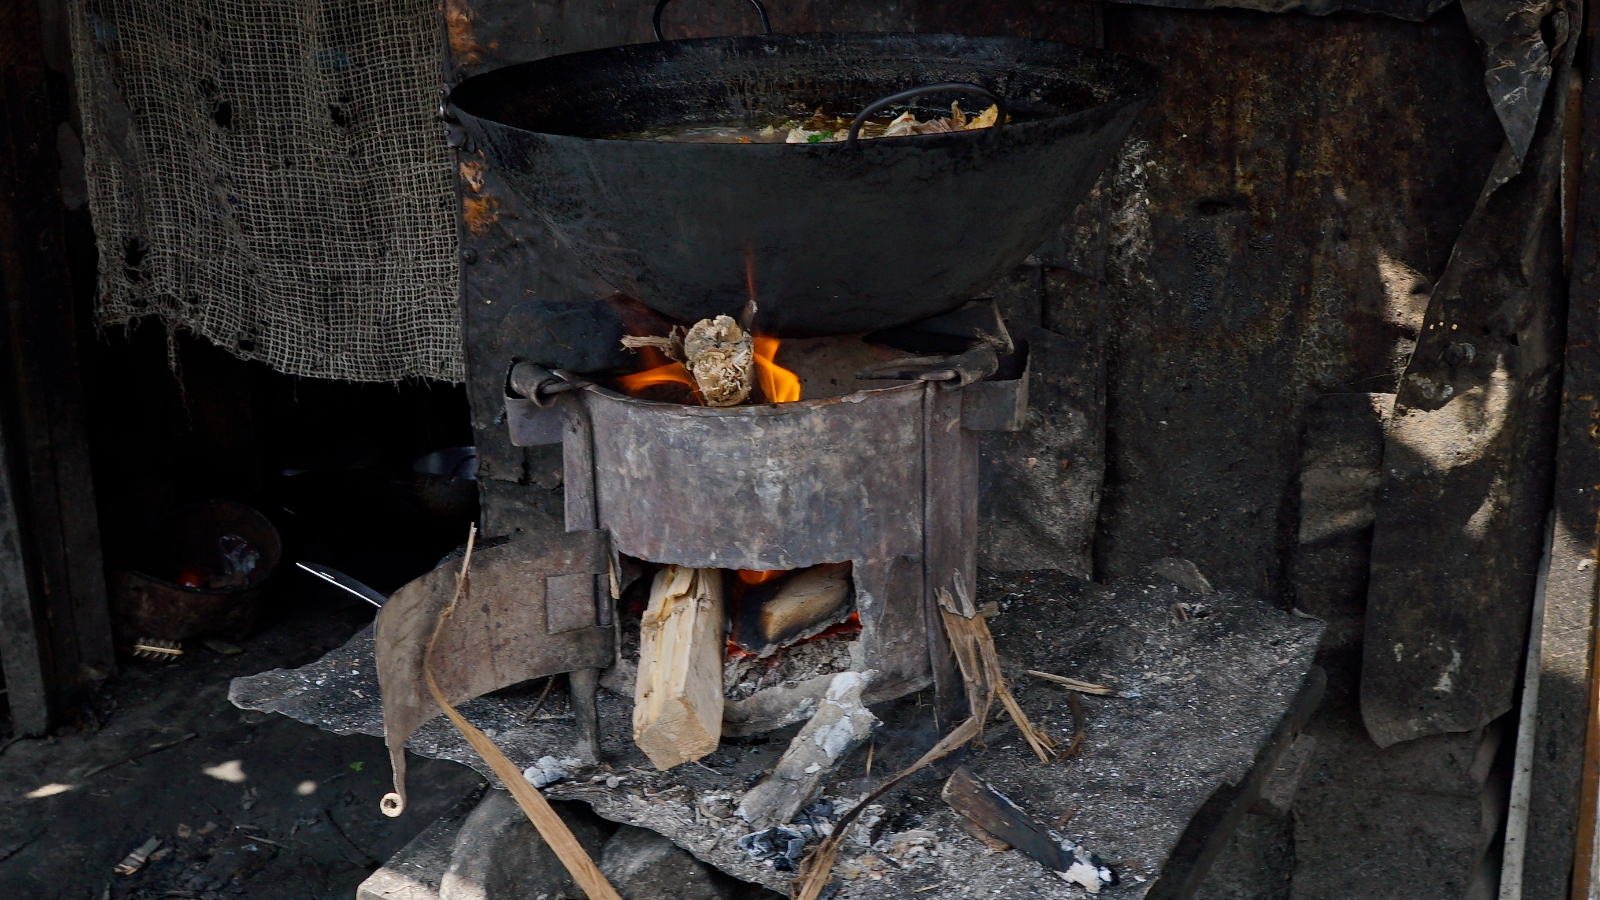 Food cooking over a wood-fired stove in the Mathare slums of Nairobi, Kenya, in 2015.